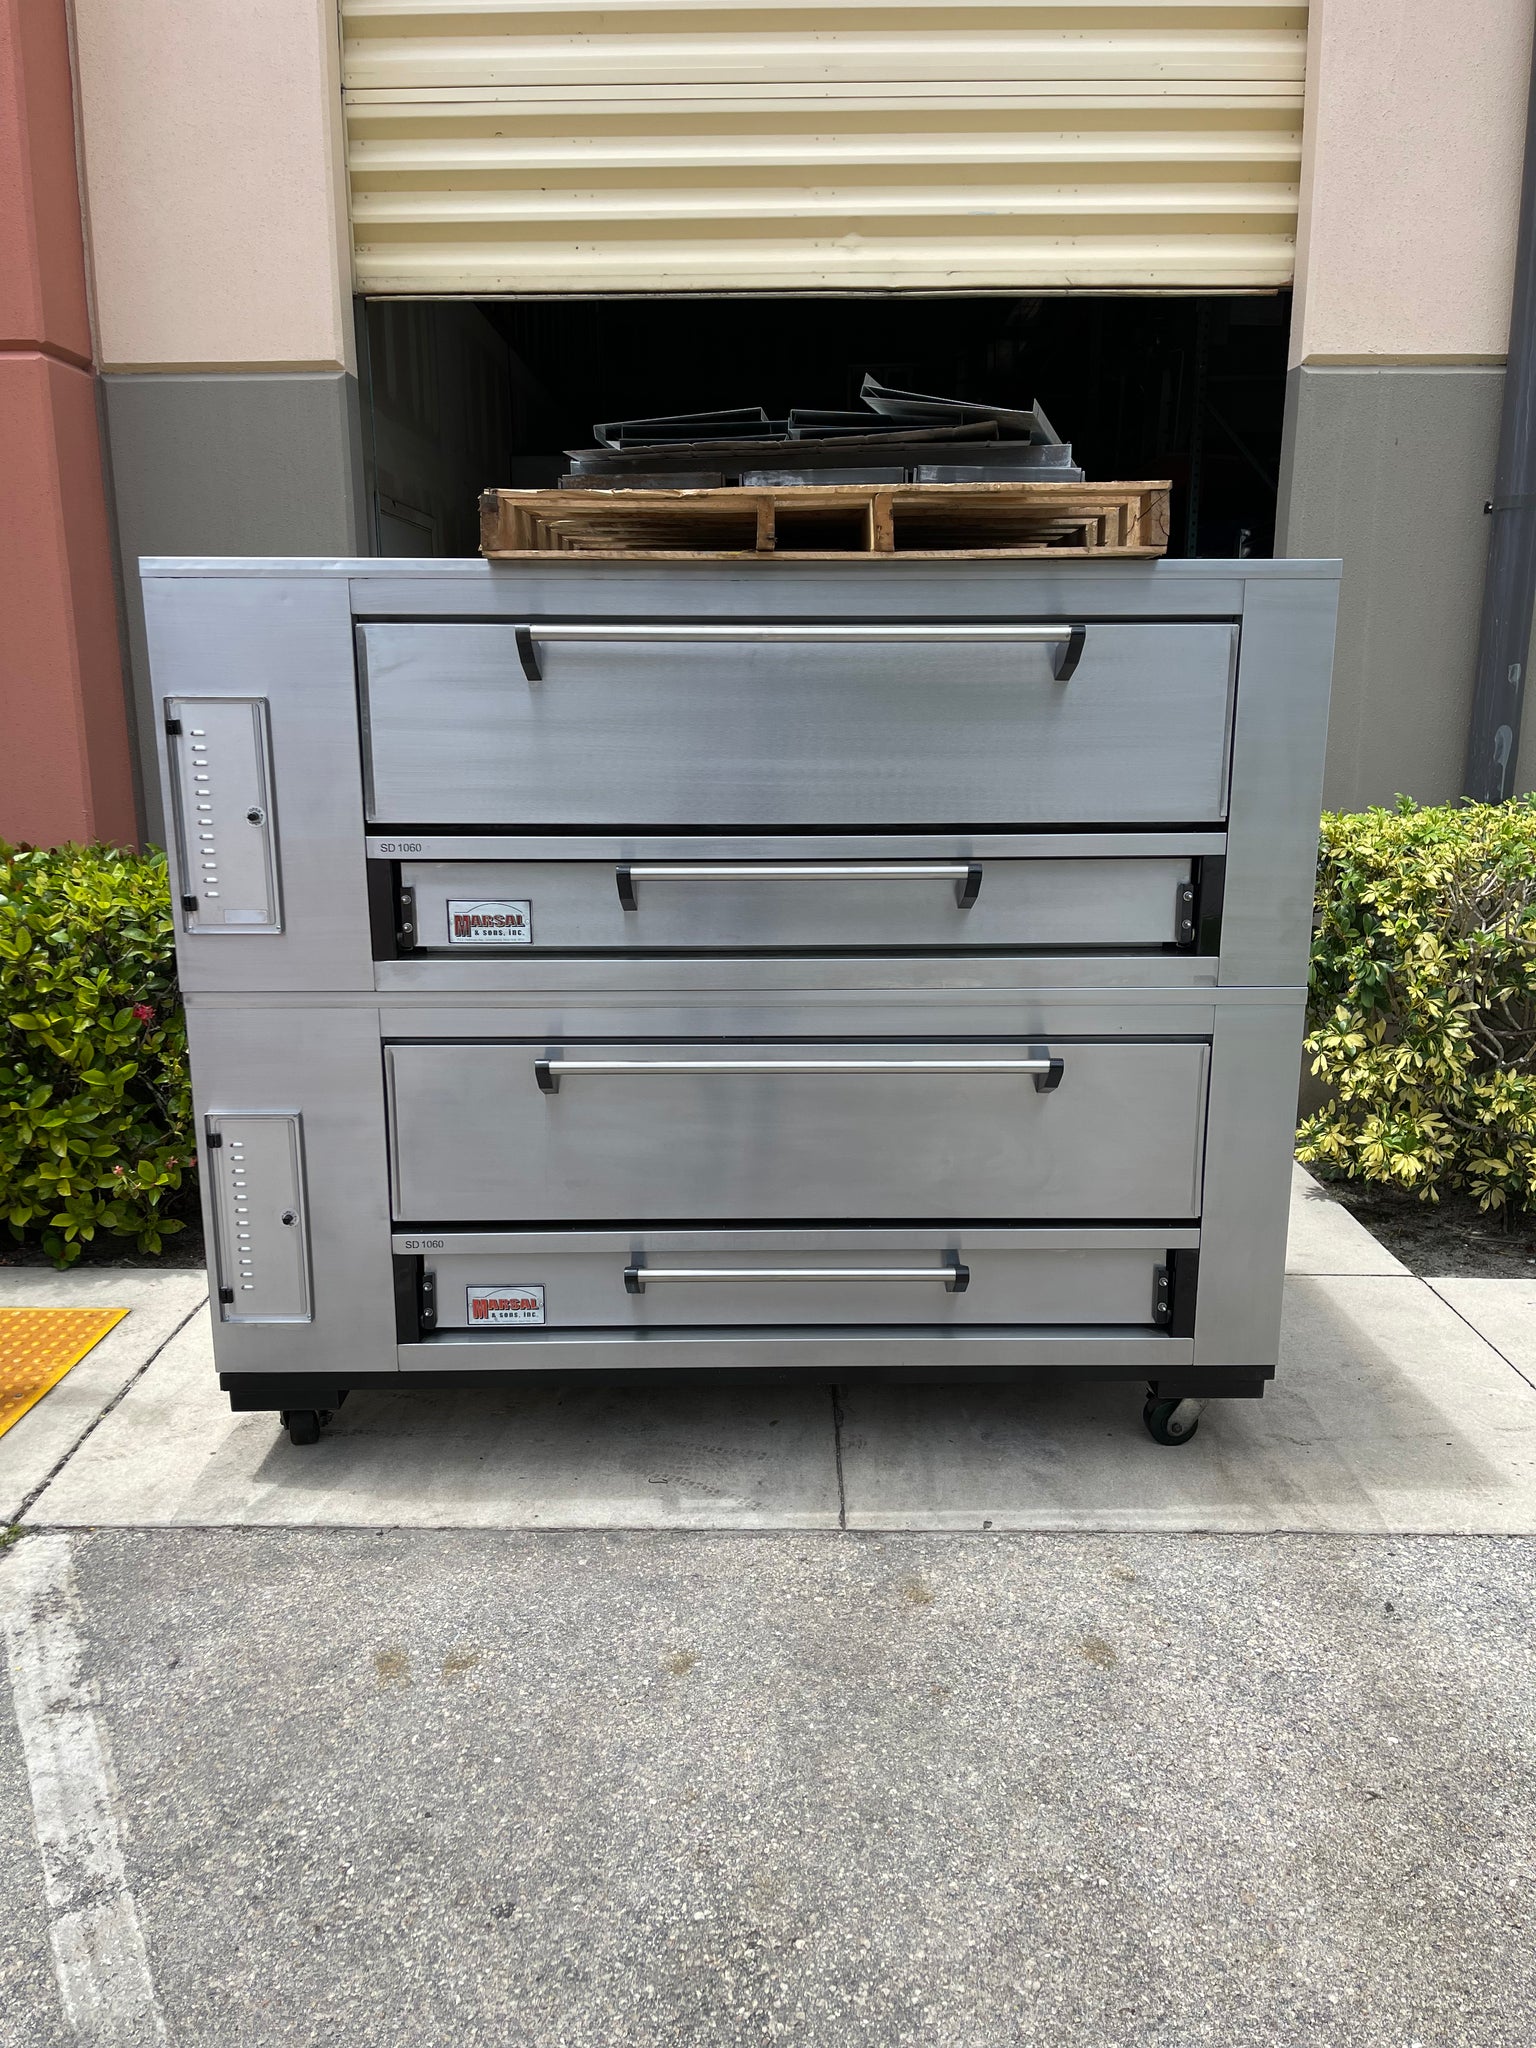 Marsal SD 1060 double stack 6 pie pizza oven